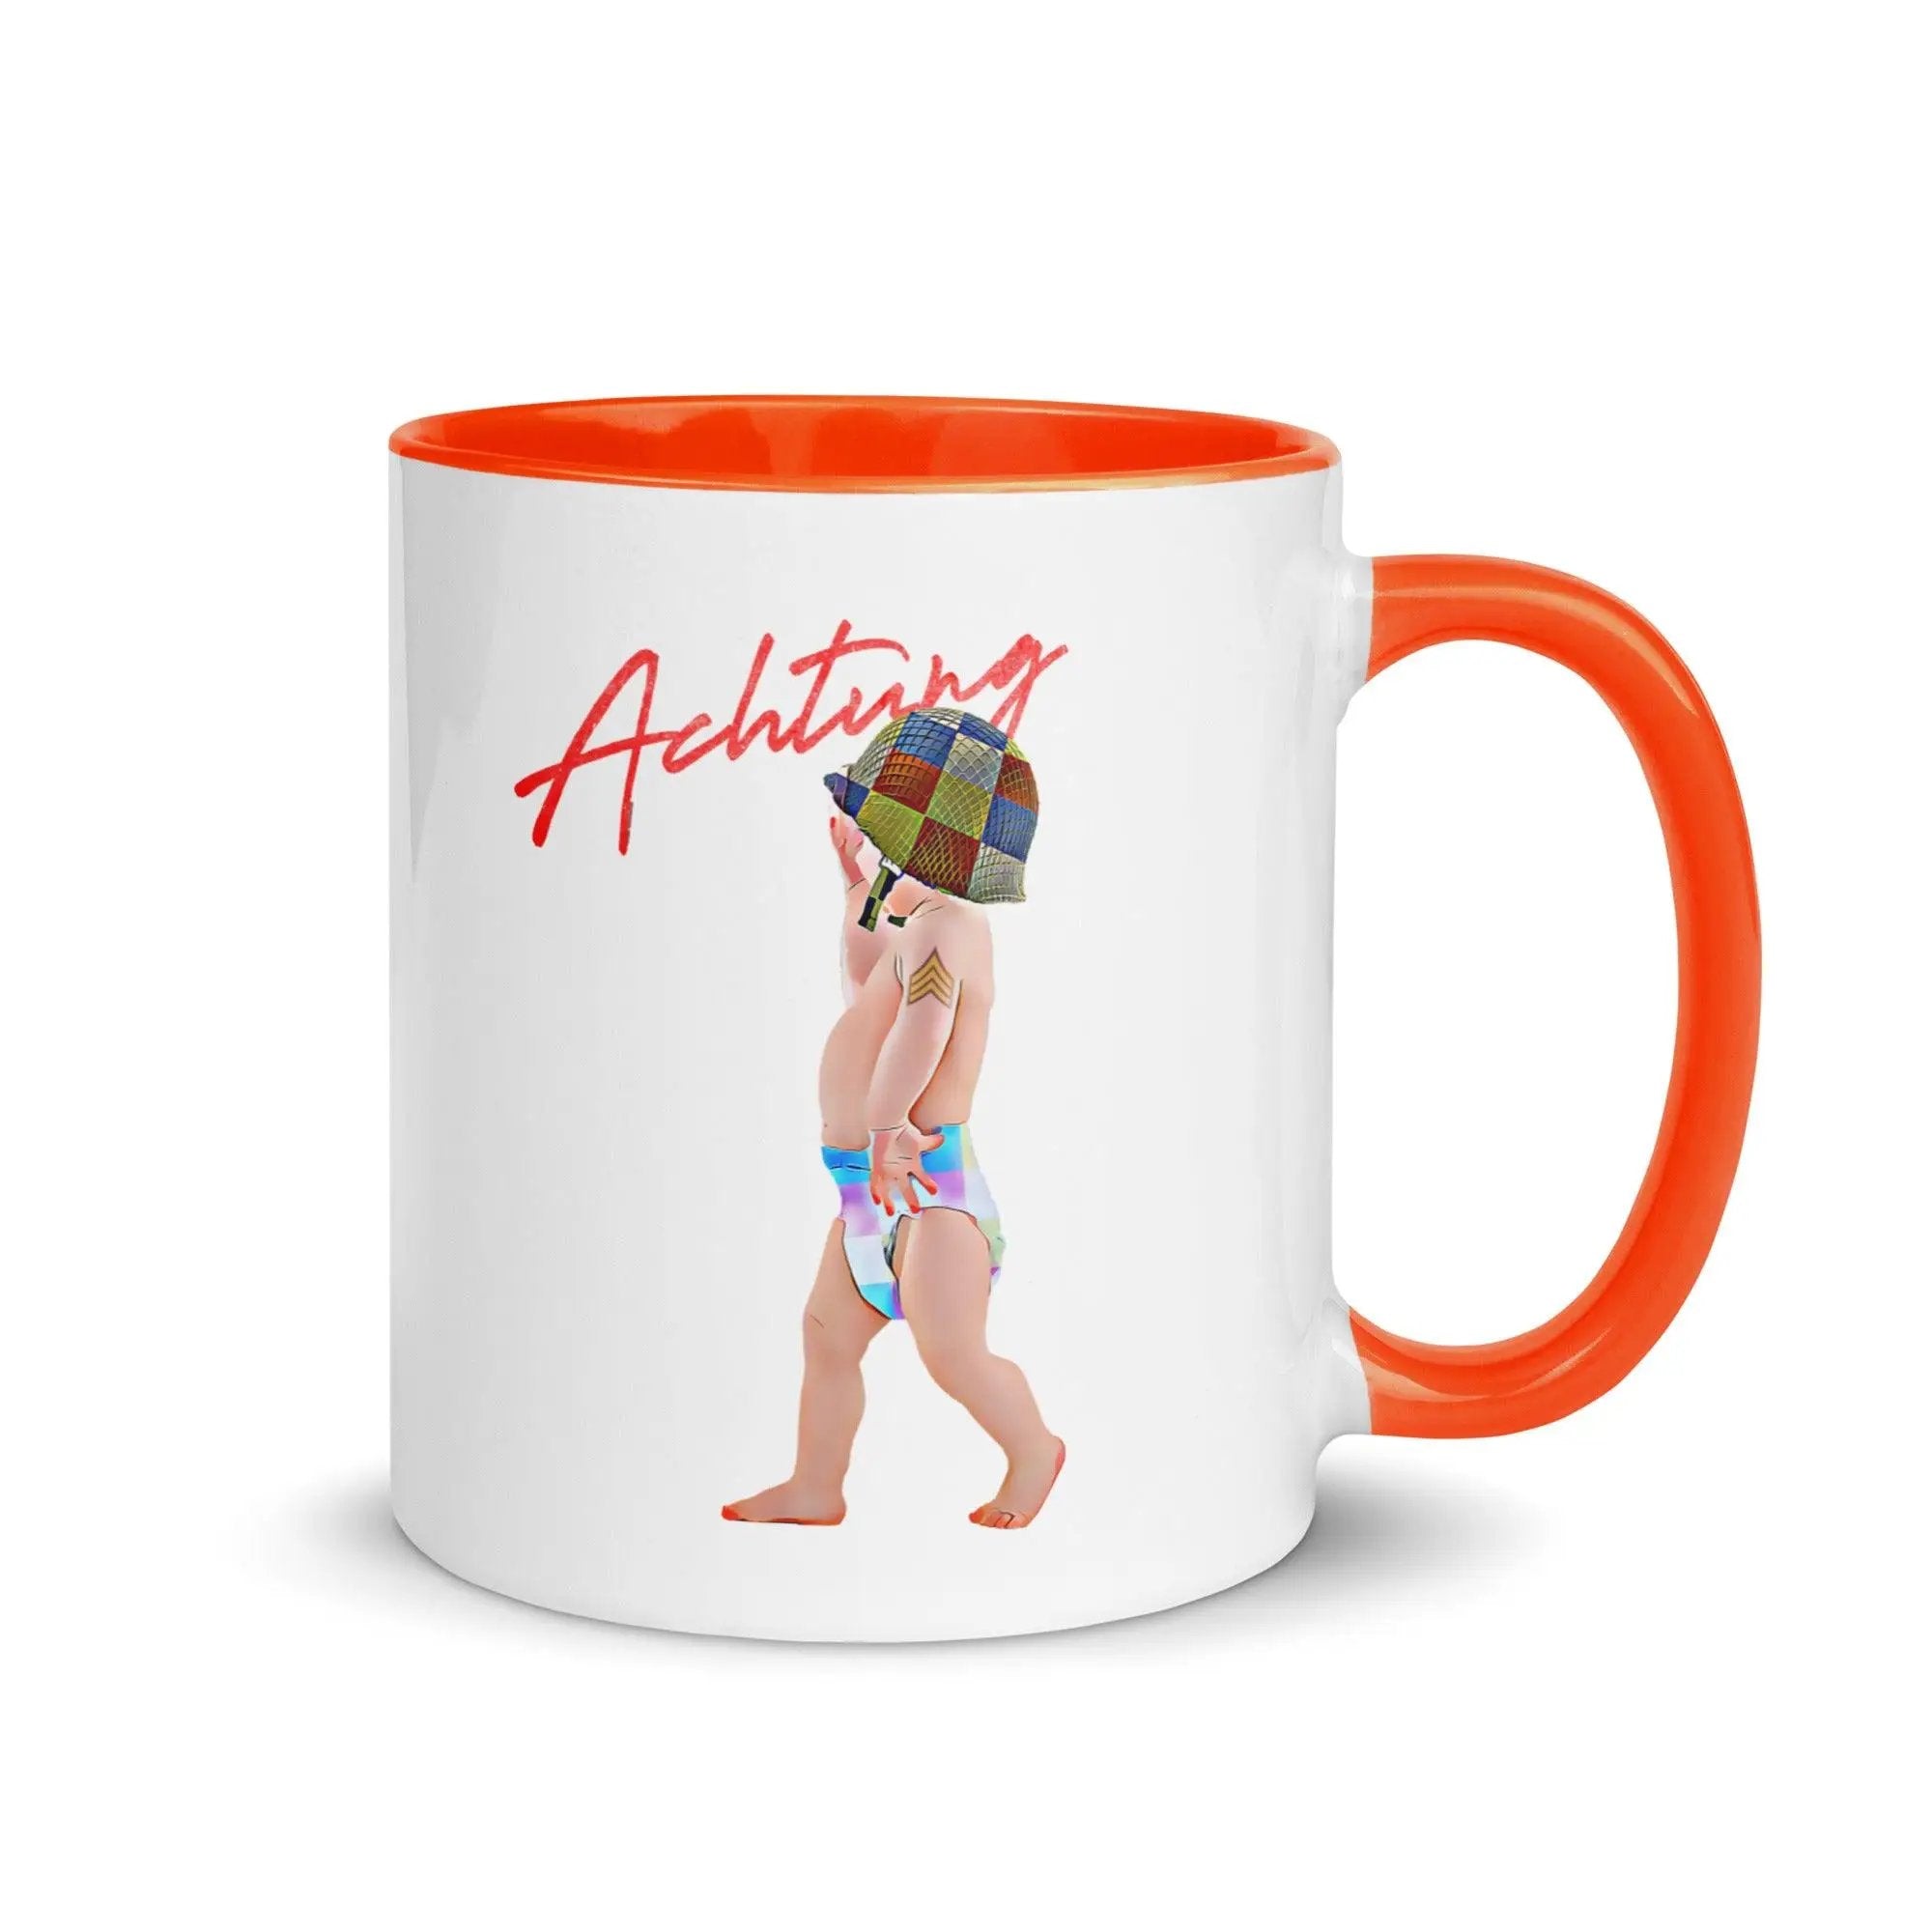 Achtung Baby Mug with Color Inside